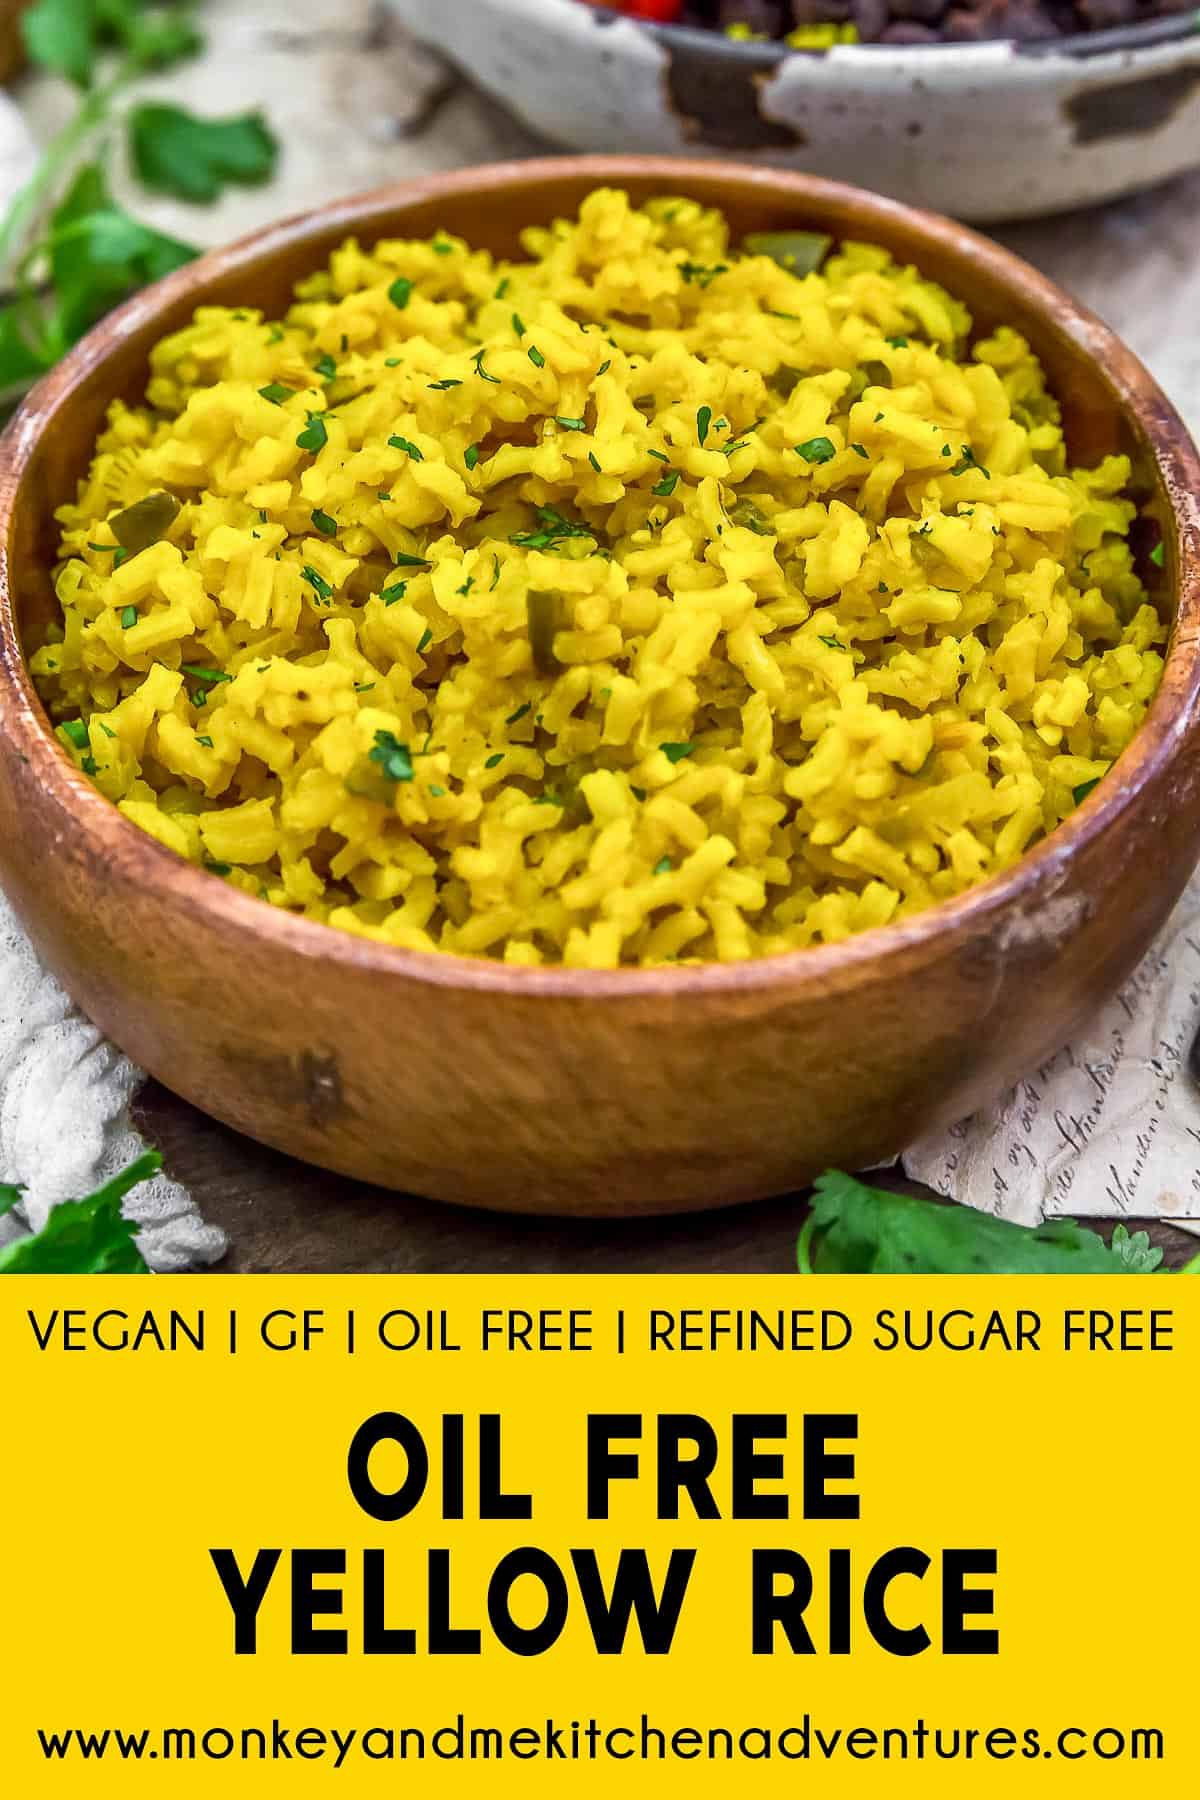 Oil Free Yellow Rice with text description